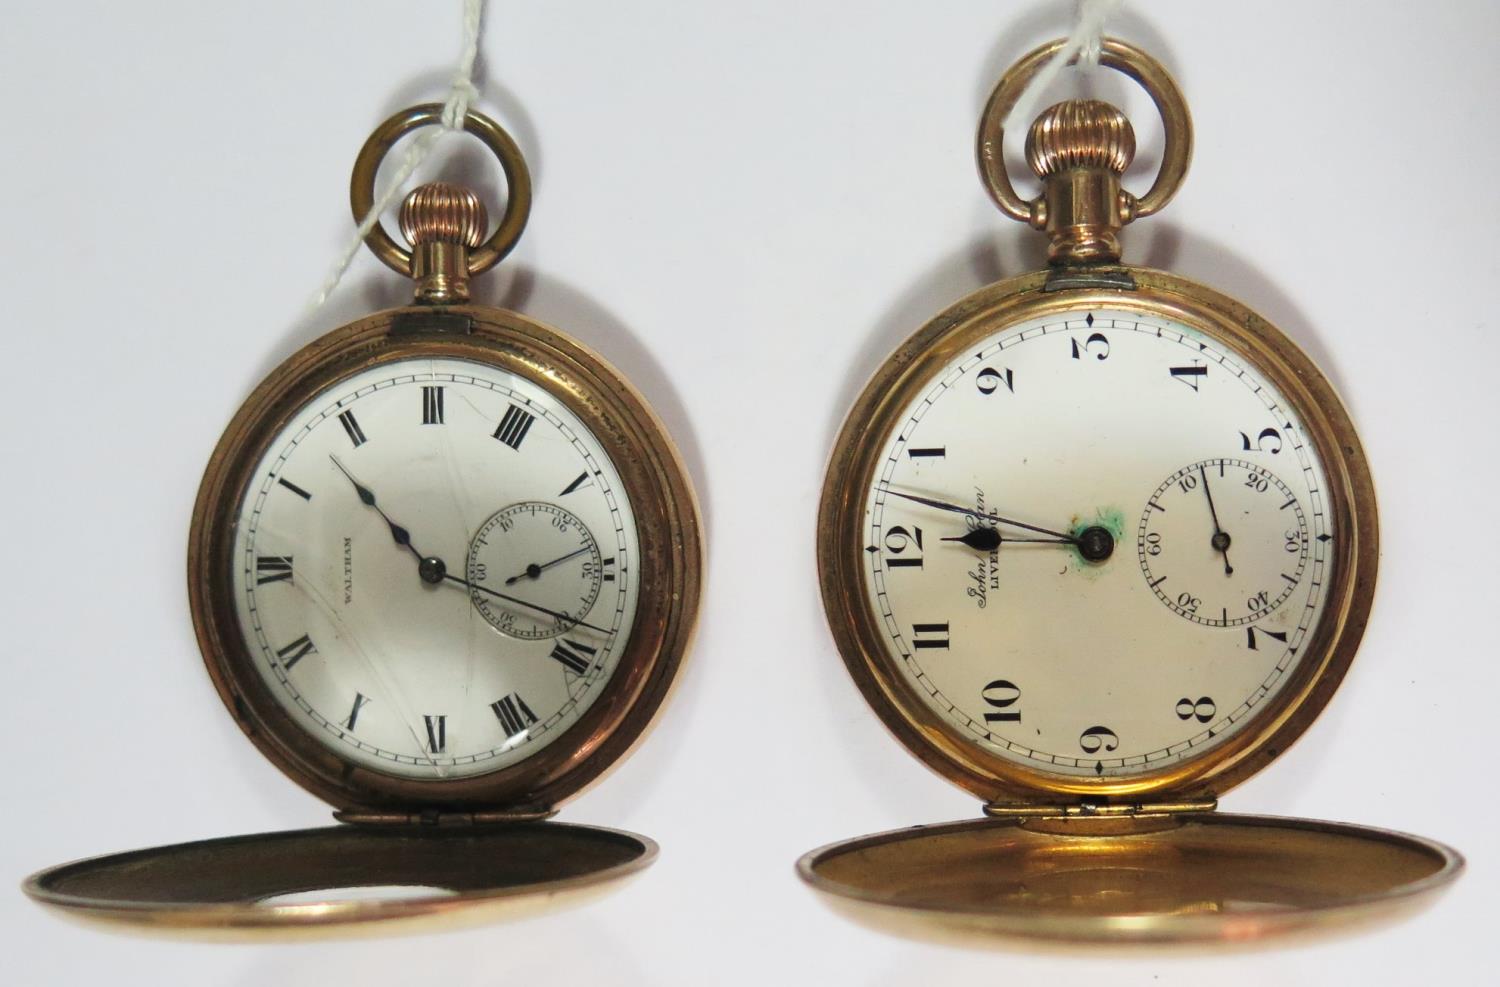 A Waltham Gold Plated Gent's Half Hunter Pocket Watch movement no. 13159620 (running, glass cracked)